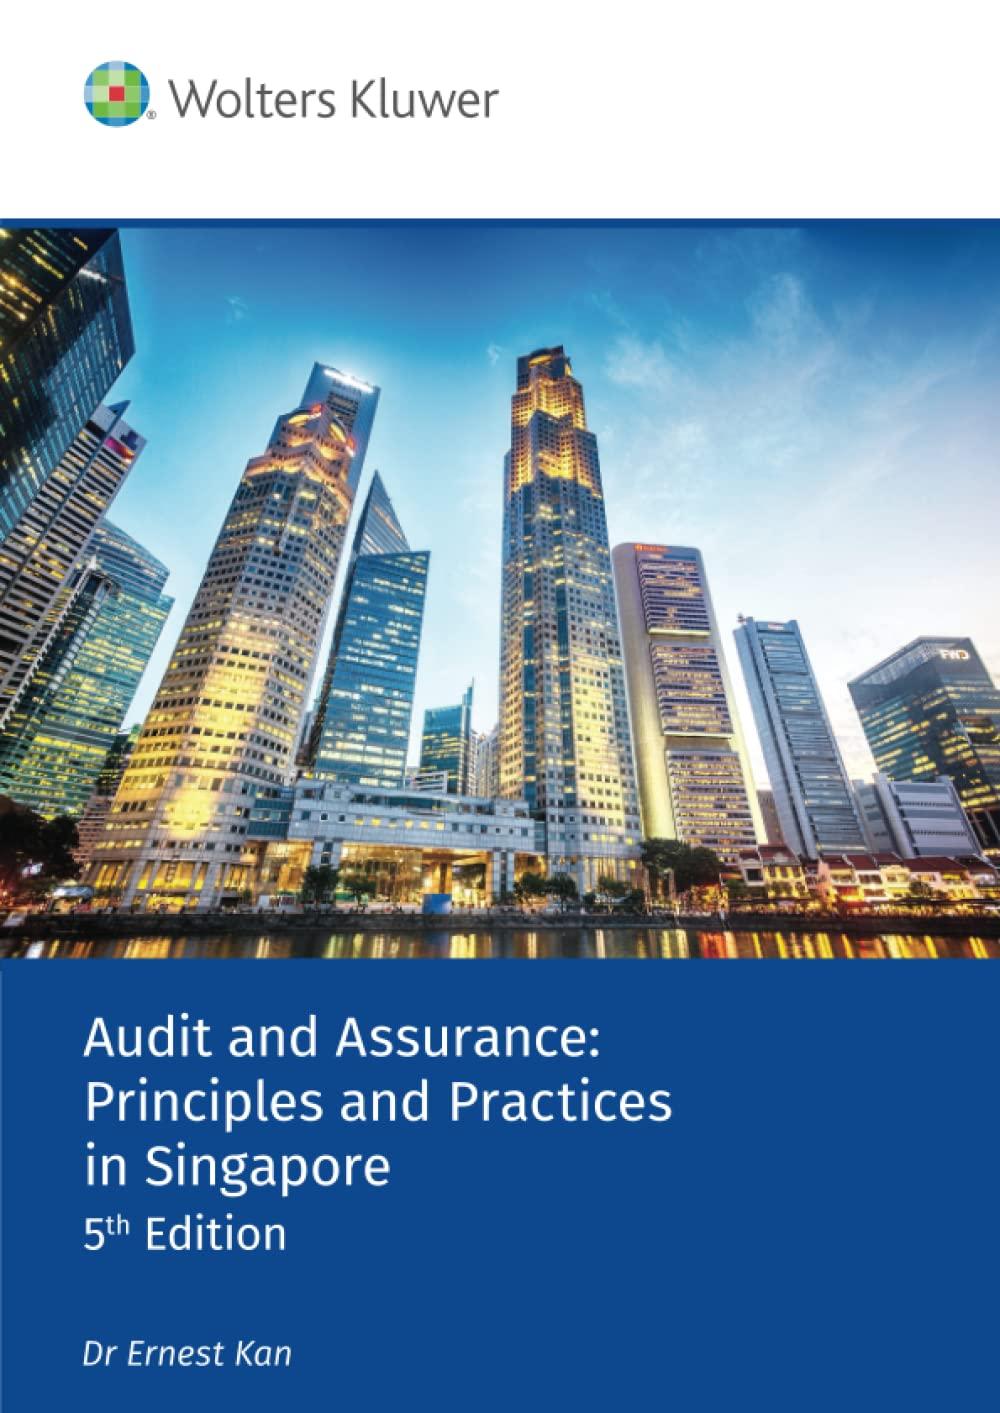 audit and assurance principles and practices in singapore 5th edition dr ernest kan 9814838136, 978-9814838139